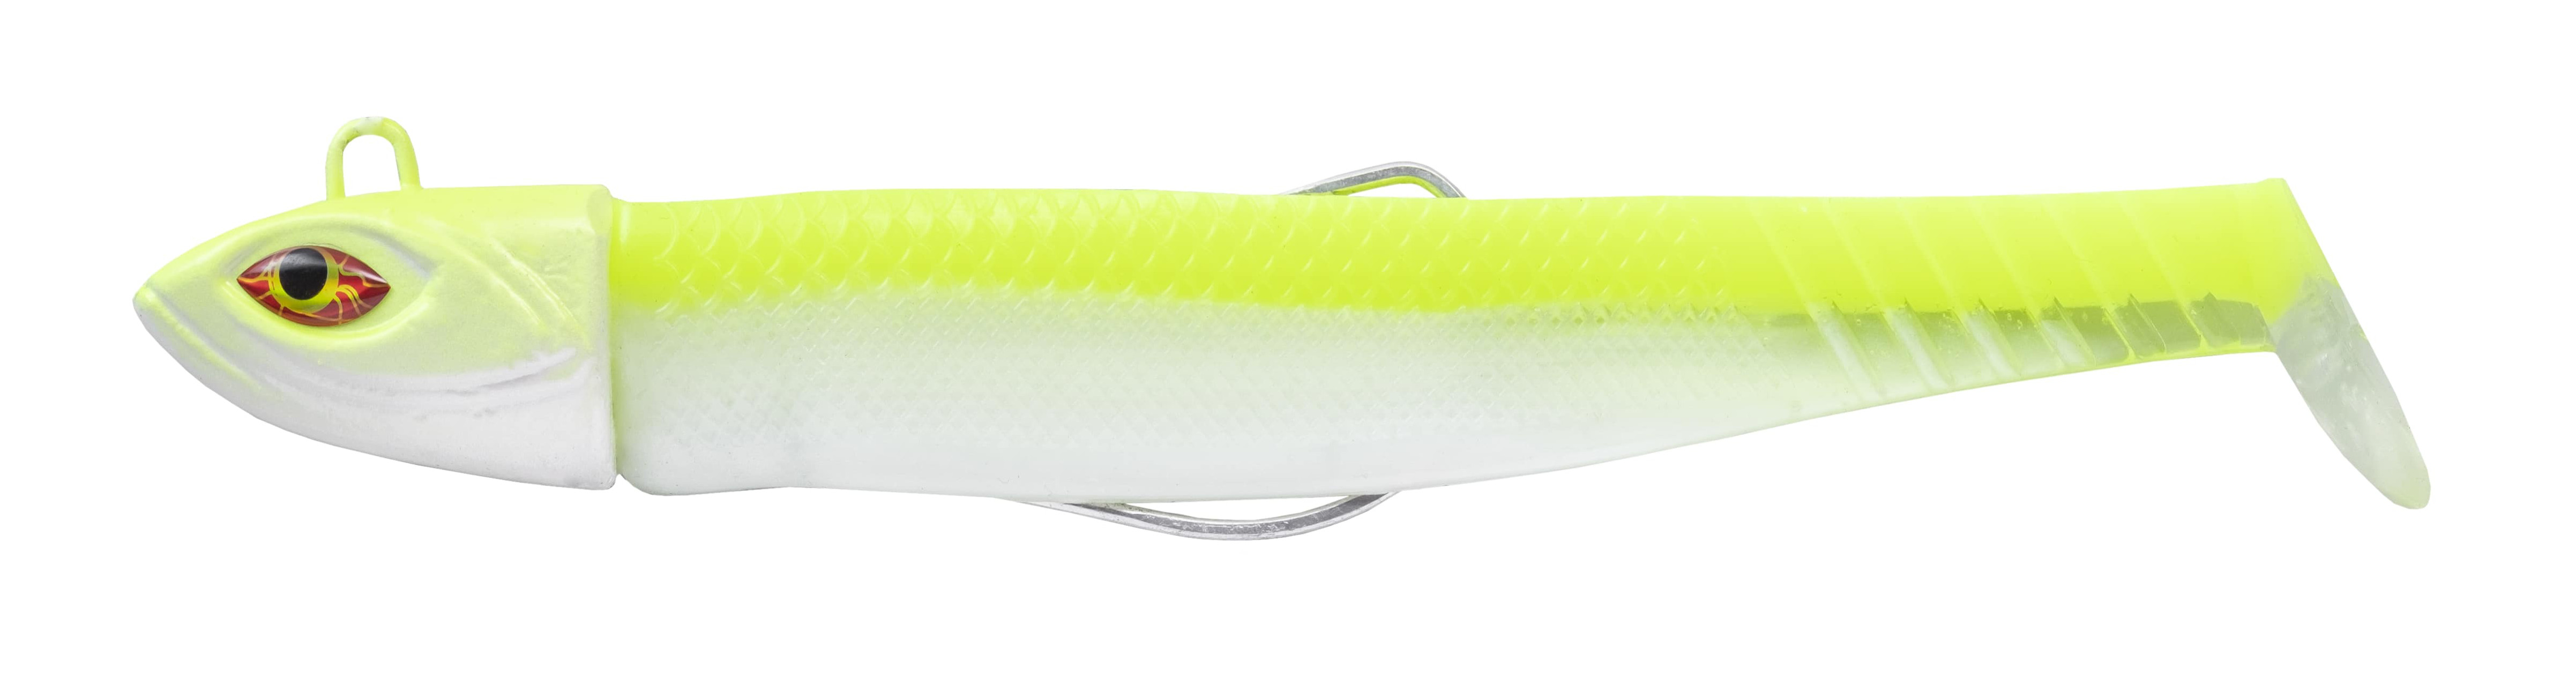 Cinnetic Crafty Candy Shad 17cm (125g) (2 pezzi) - White Chartreuse